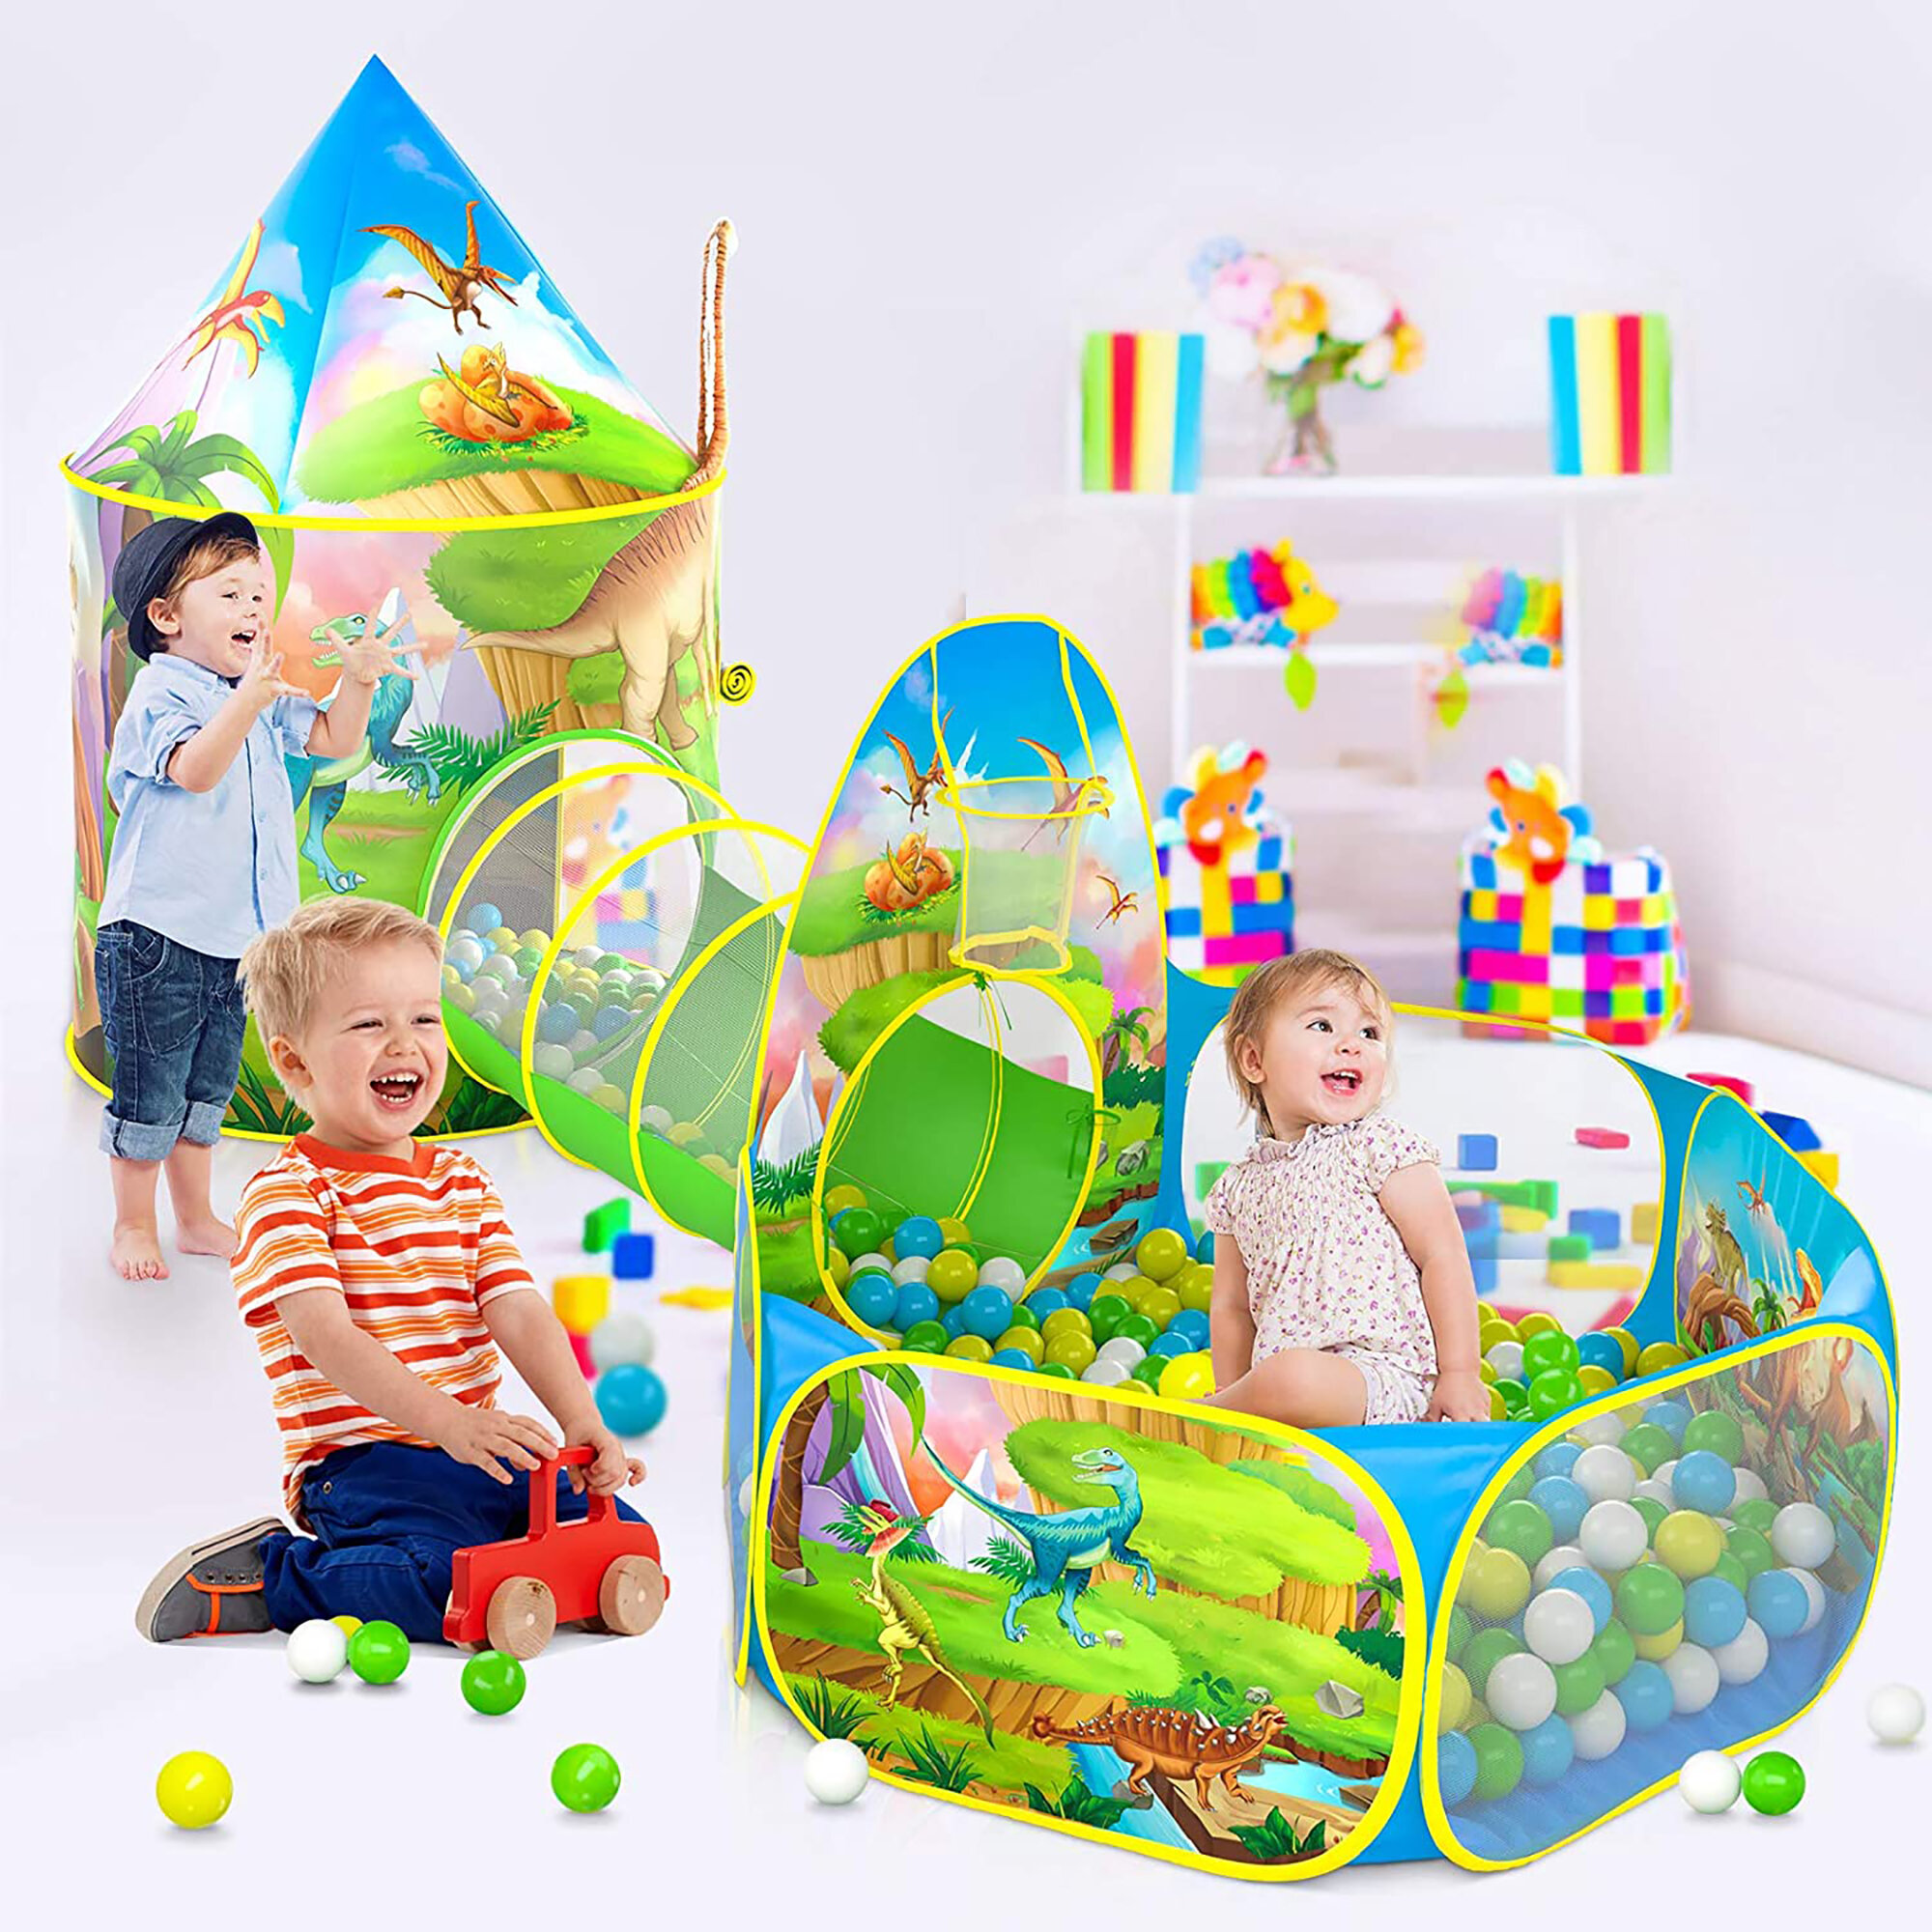 Perfect Dinosaurs Theme Ball Pit Basketball Hoop Play Tent for Kids and Toddlers 